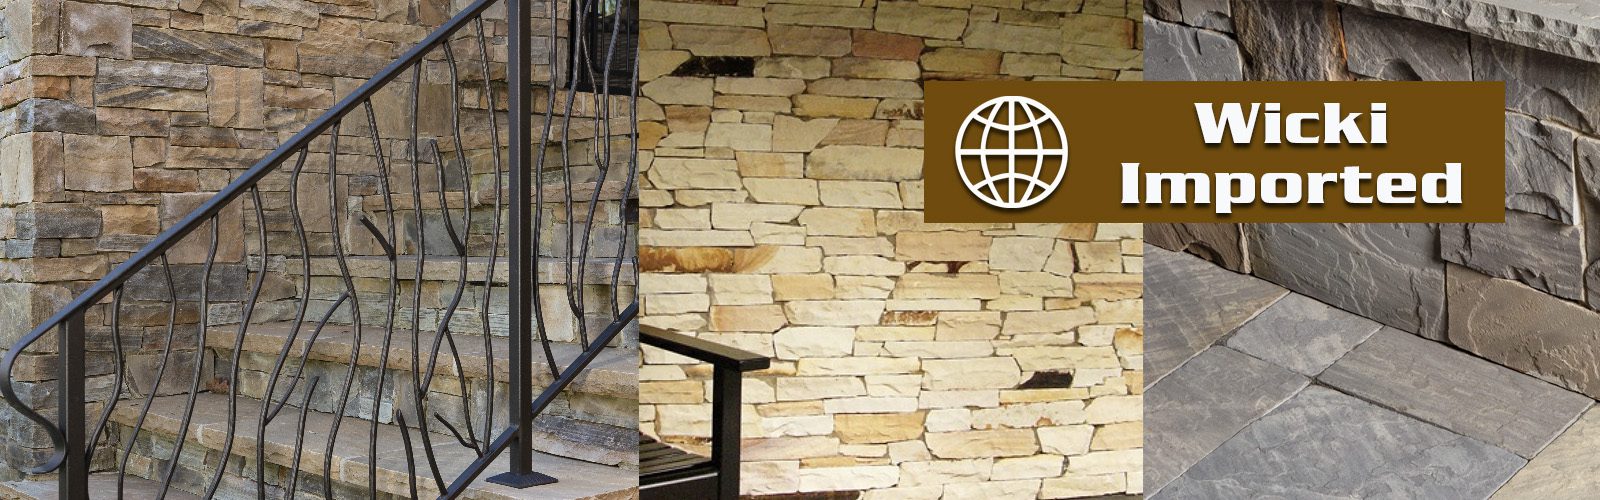 Wicki stone is a imported thin veneer building stone dealer